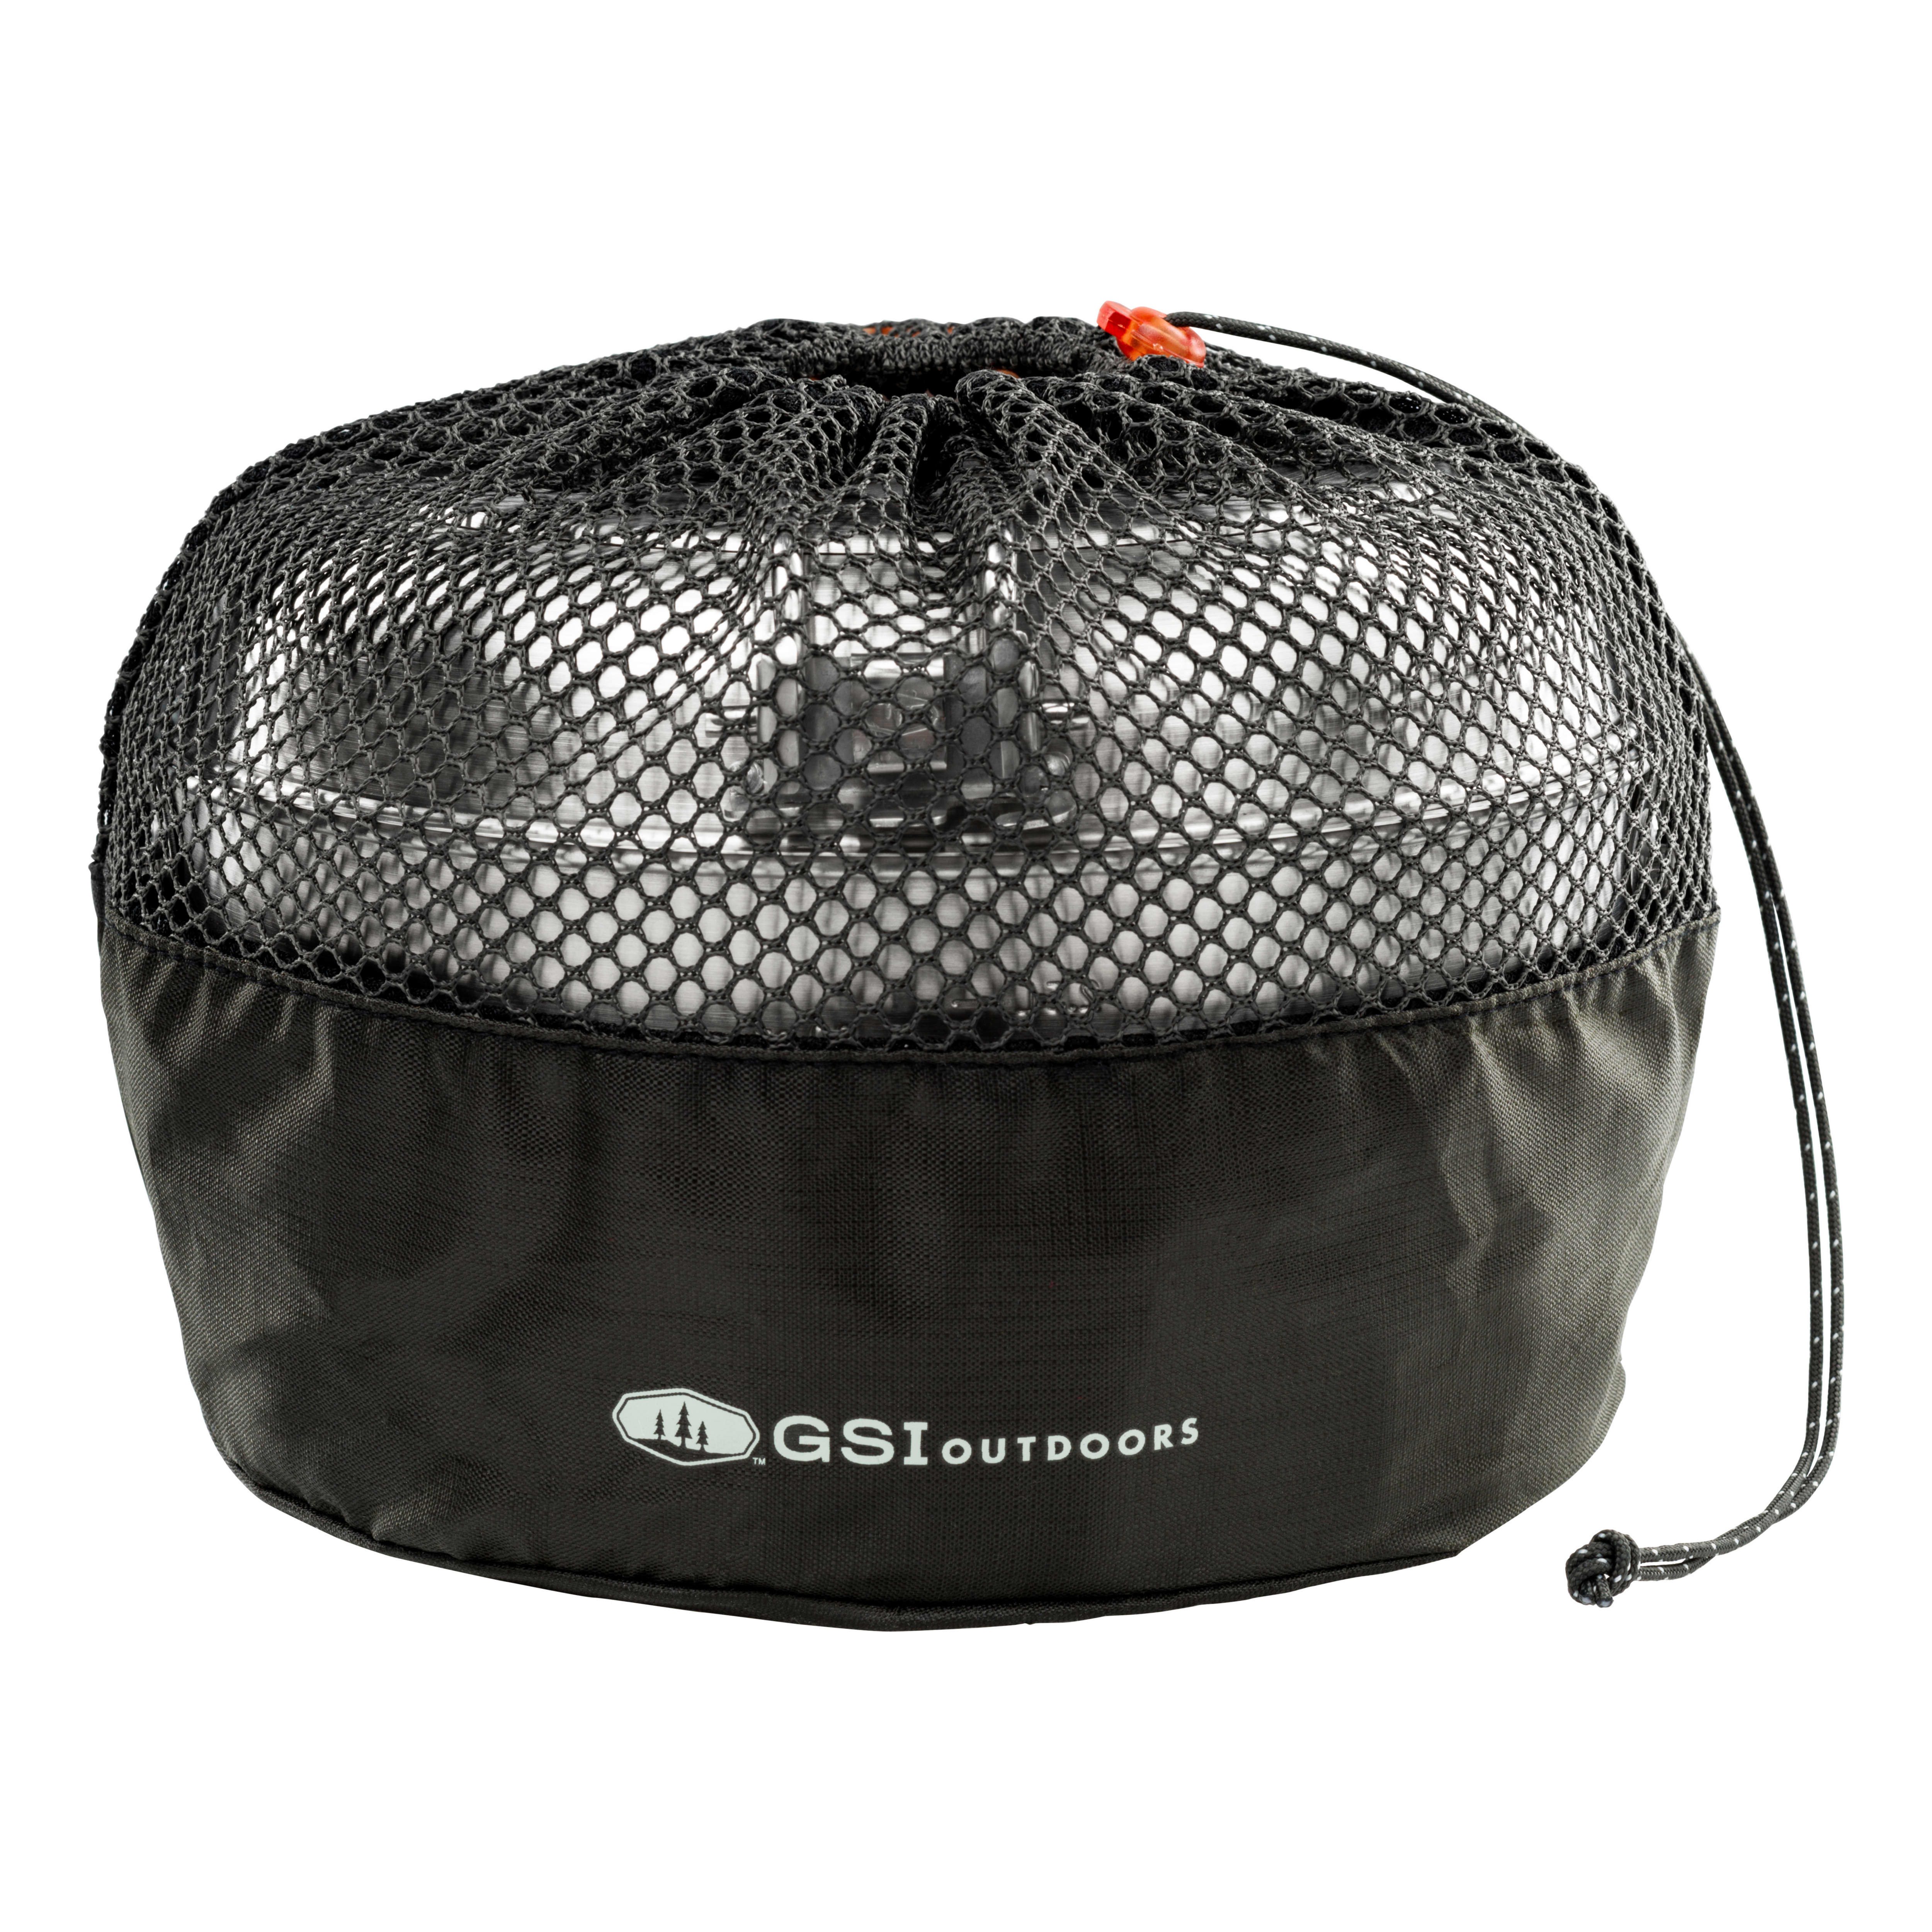 GSI Outdoors Stainless Base Camper Medium Cookset - In Stuff Sack